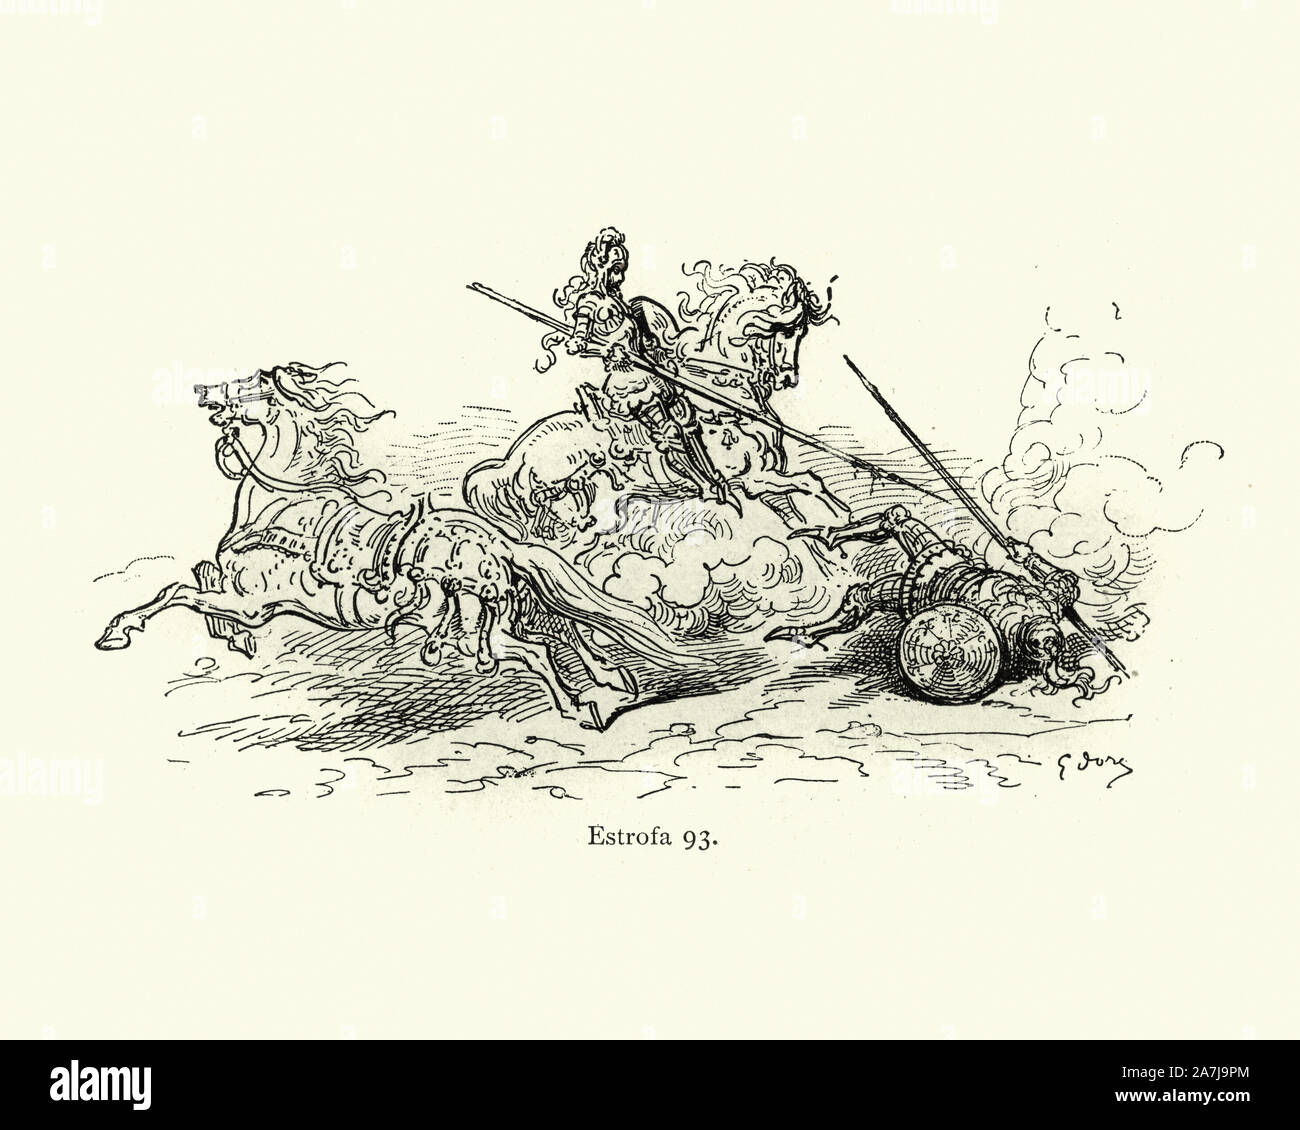 Vintage illustration from the story Orlando Furioso.  Knight knocked another of his horse with a lance. Orlando Furioso (The Frenzy of Orlando) an Italian epic poem by Ludovico Ariosto, illustrated by Gustave Dore. The story is also a chivalric romance which stemmed from a tradition beginning in the late Middle Ages. Stock Photo